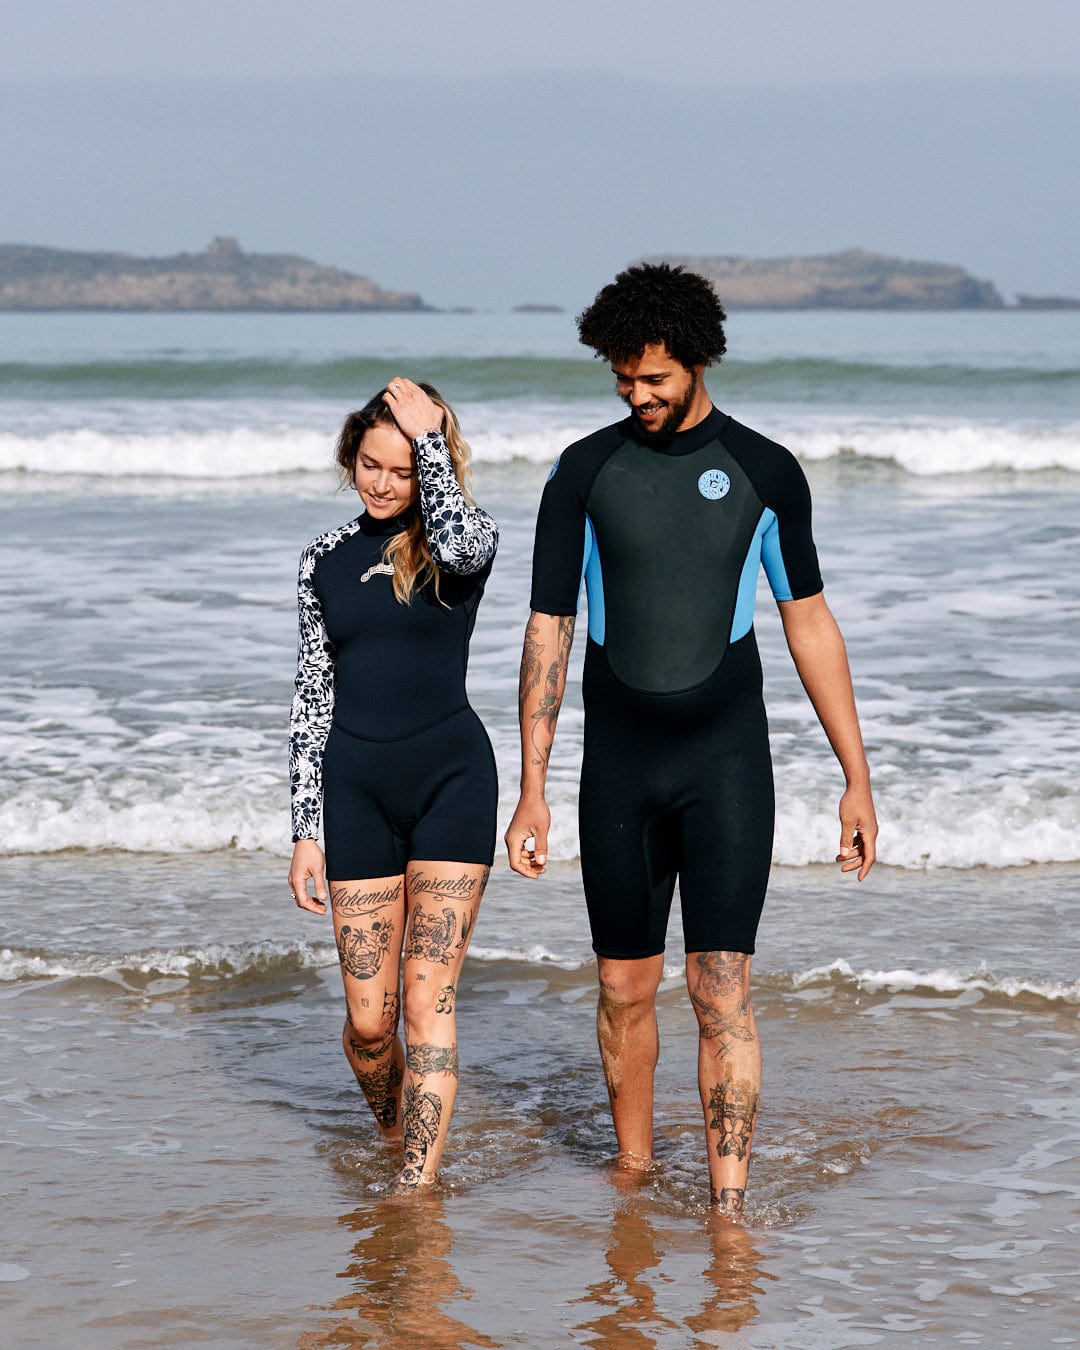 A man and a woman in Saltrock neoprene wetsuits walking on a beach, both smiling and looking down, with visible tattoos on their legs.